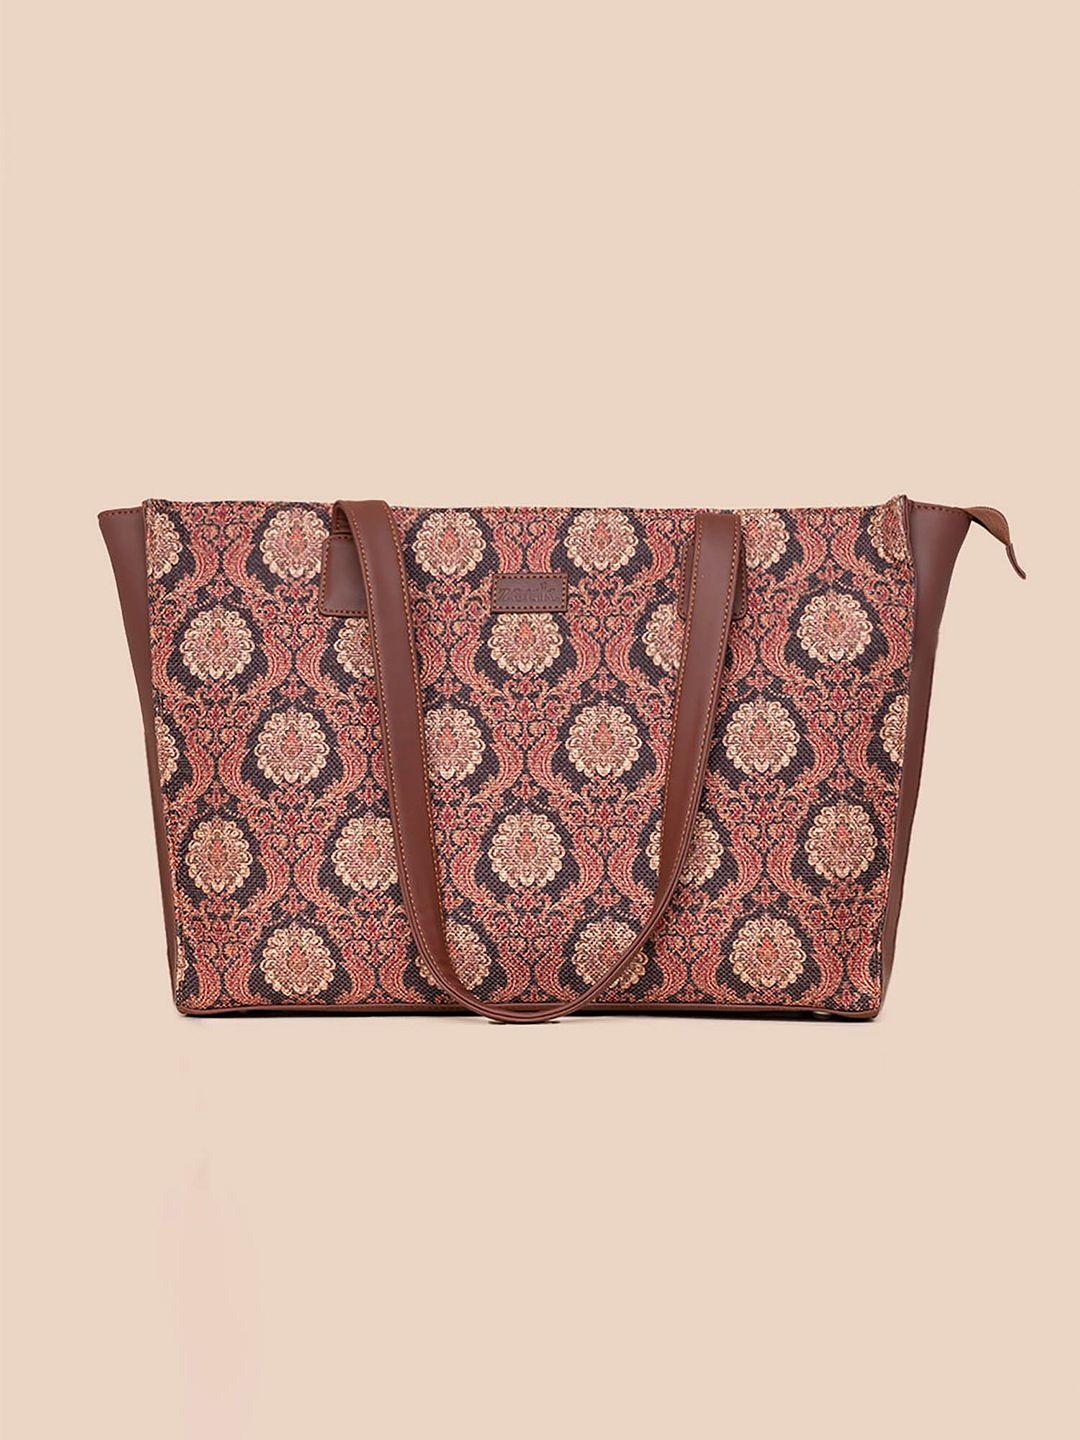 zouk ethnic motifs printed structured tote bag